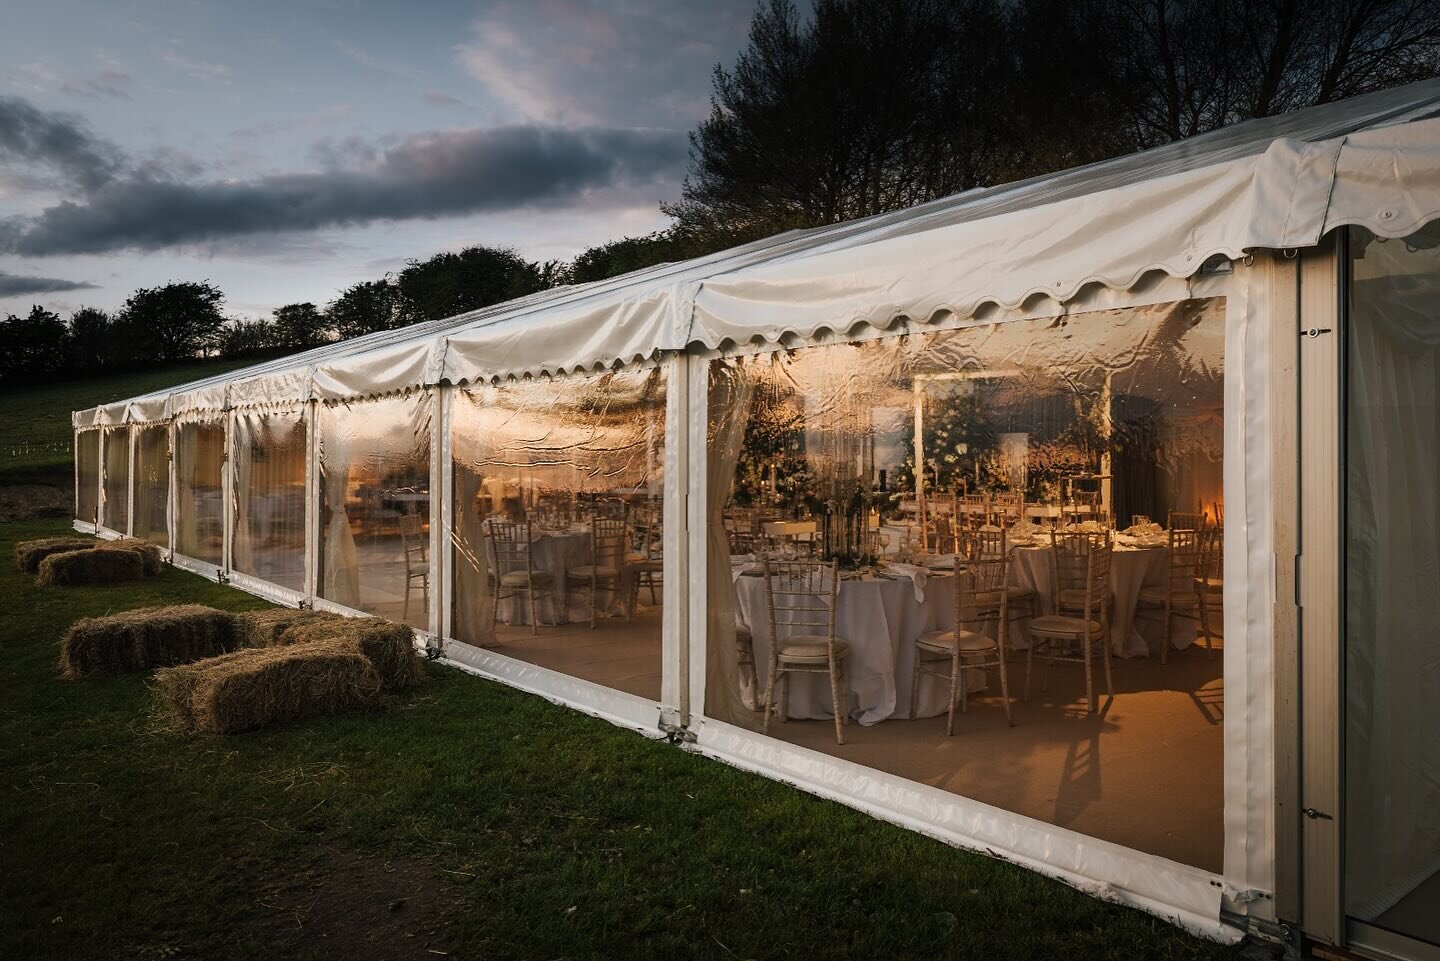 One of the significant advantages of marquee hire is the flexibility it provides in selecting a venue. 

Unlike traditional event spaces, marquees can be set up in almost any location, be it your own backyard, a scenic countryside, or even on a beach